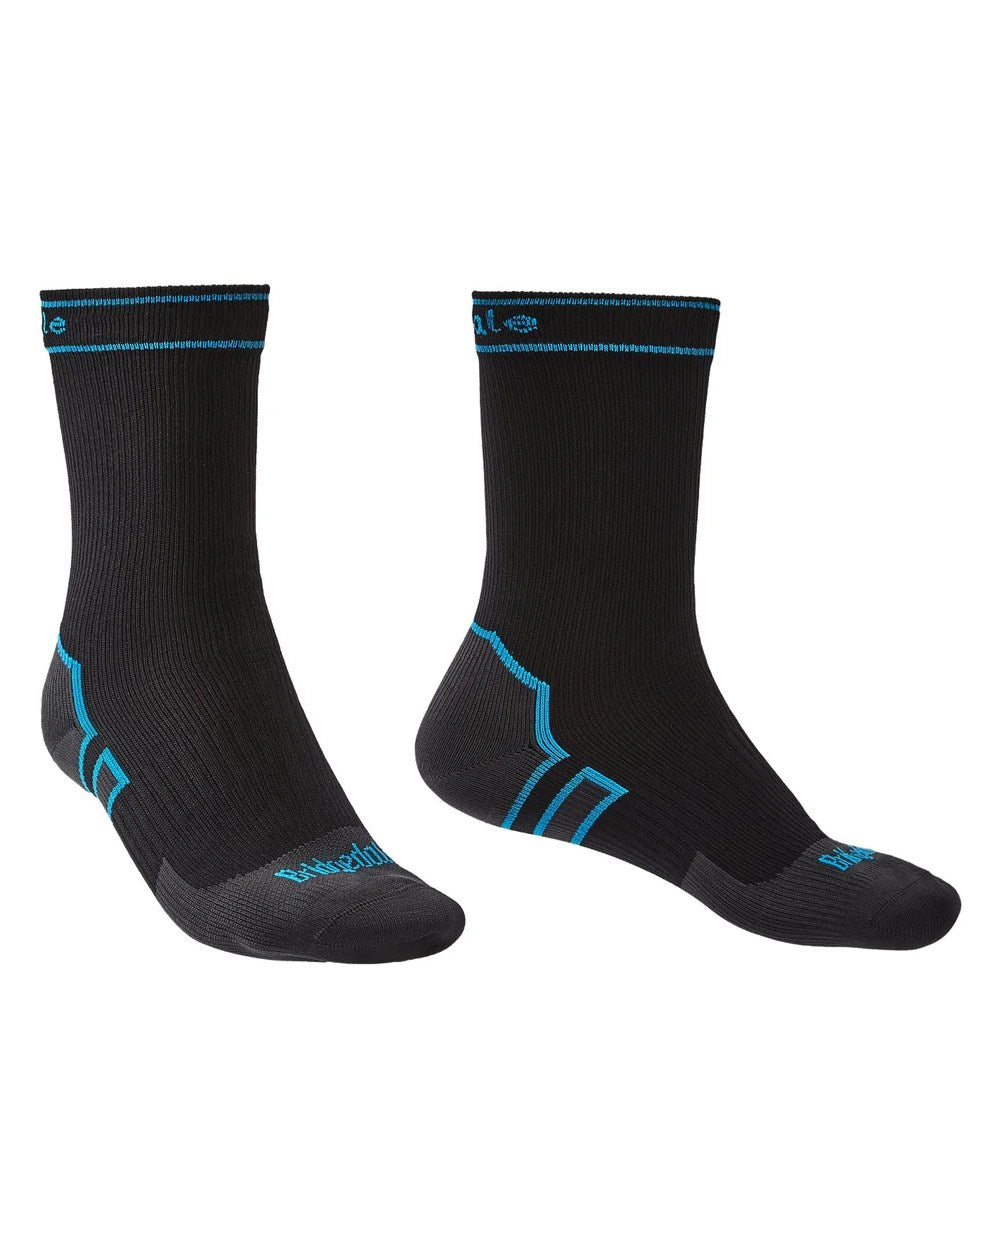 Black Coloured Bridgedale StormSock Midweight Boot Socks On A White Background 